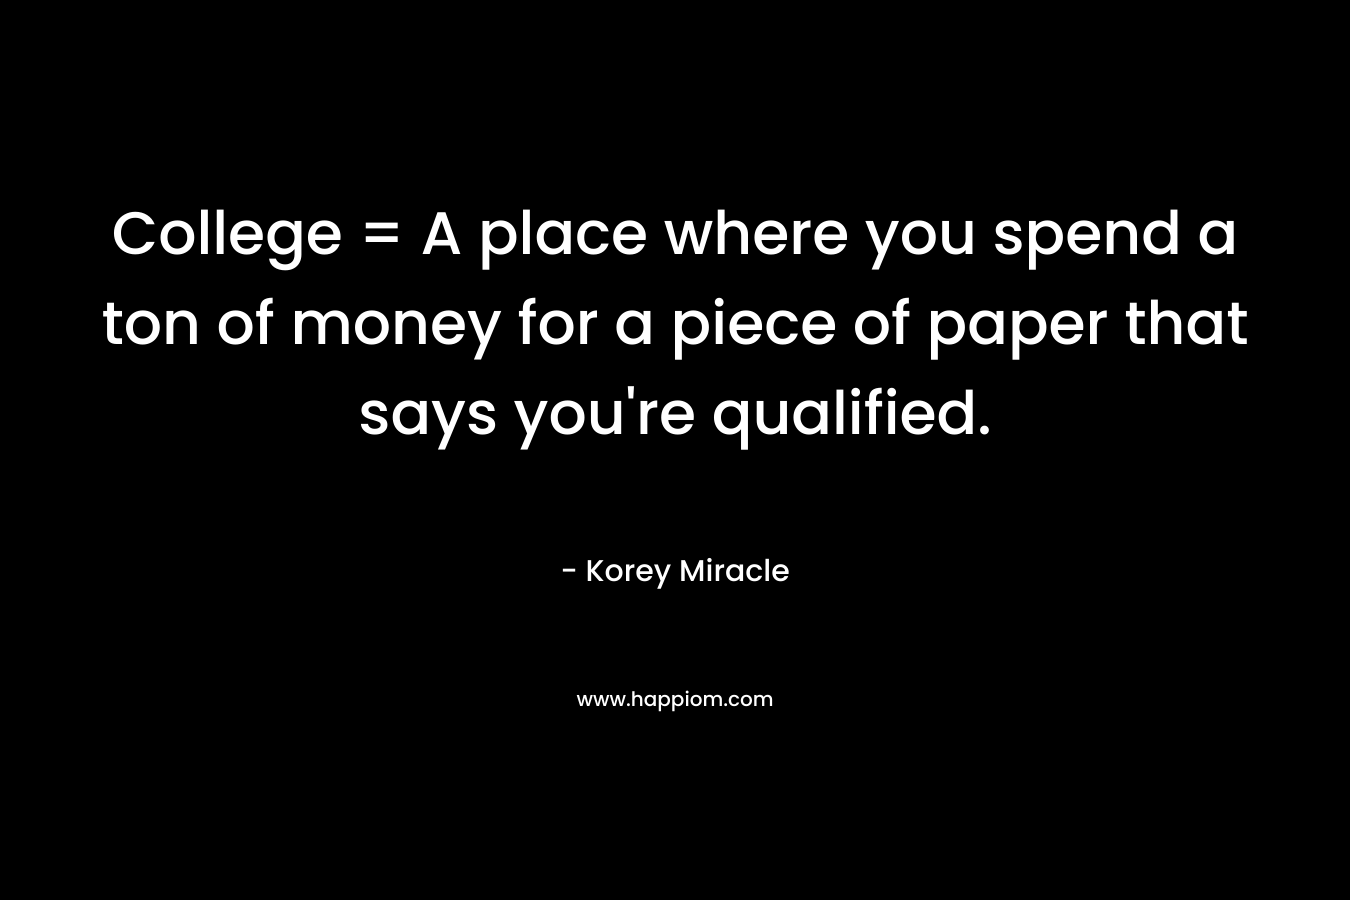 College = A place where you spend a ton of money for a piece of paper that says you’re qualified. – Korey Miracle